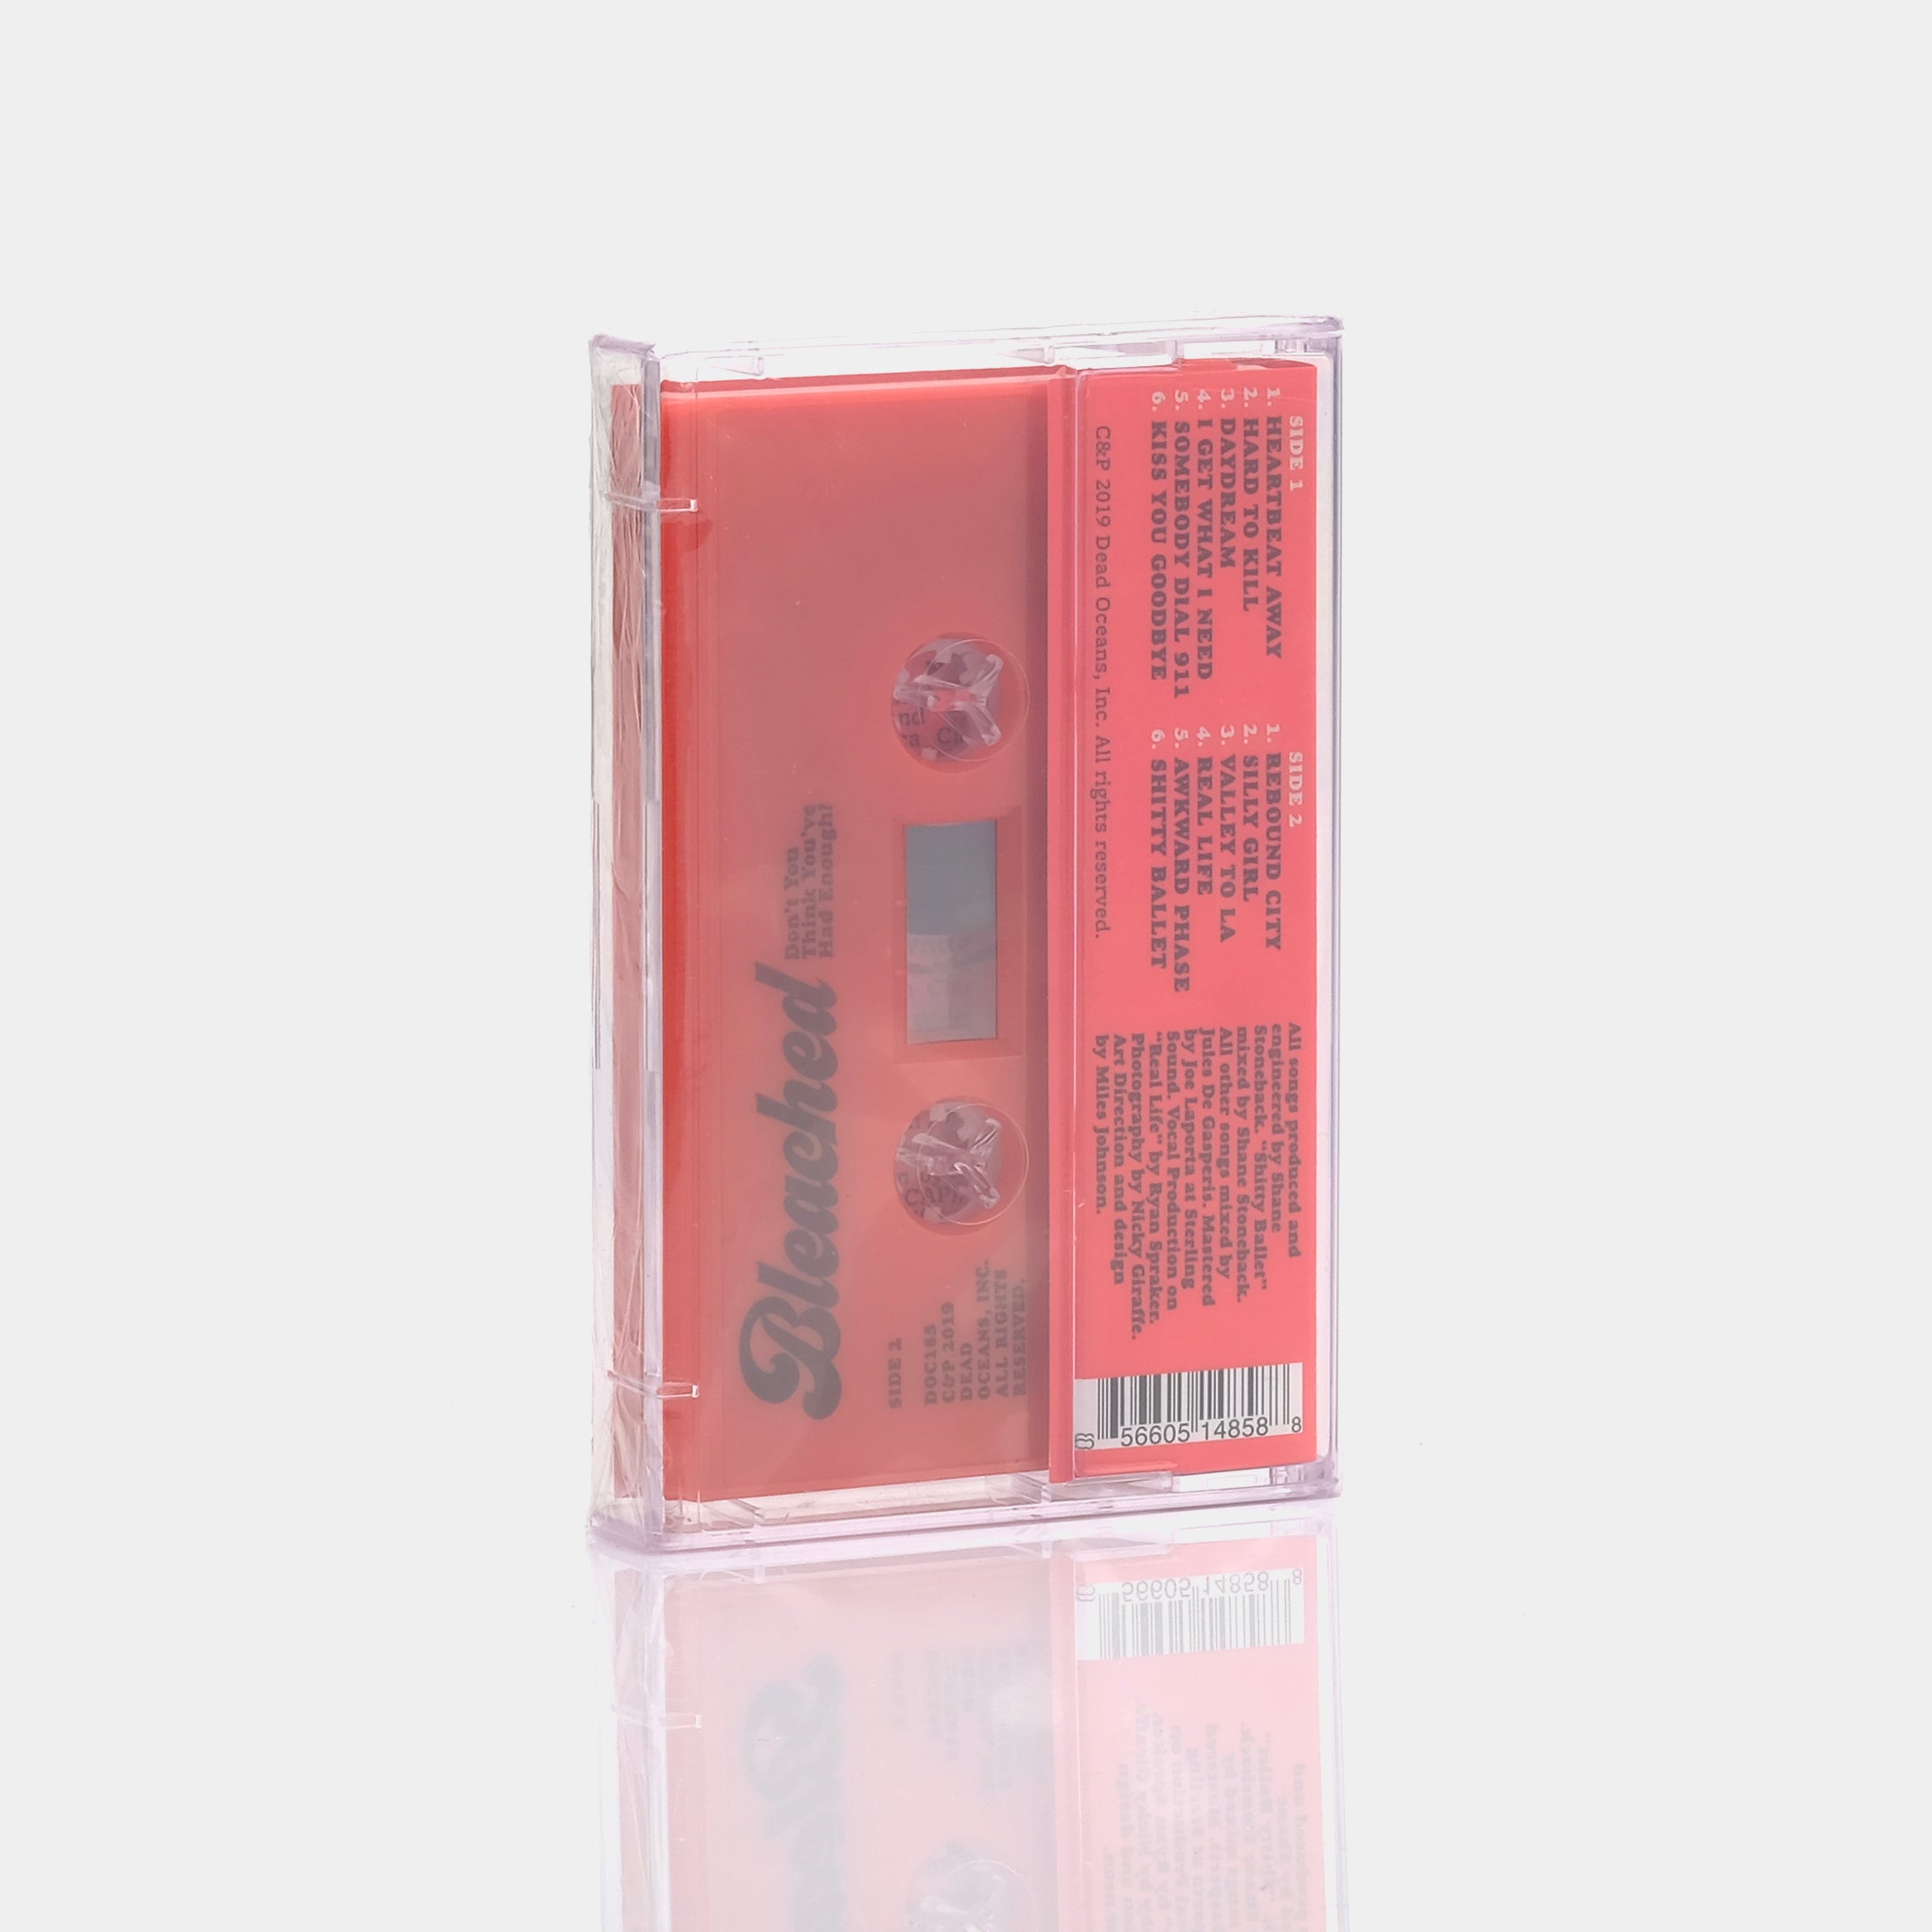 Bleached - Don't You Think You've Had Enough? Cassette Tape